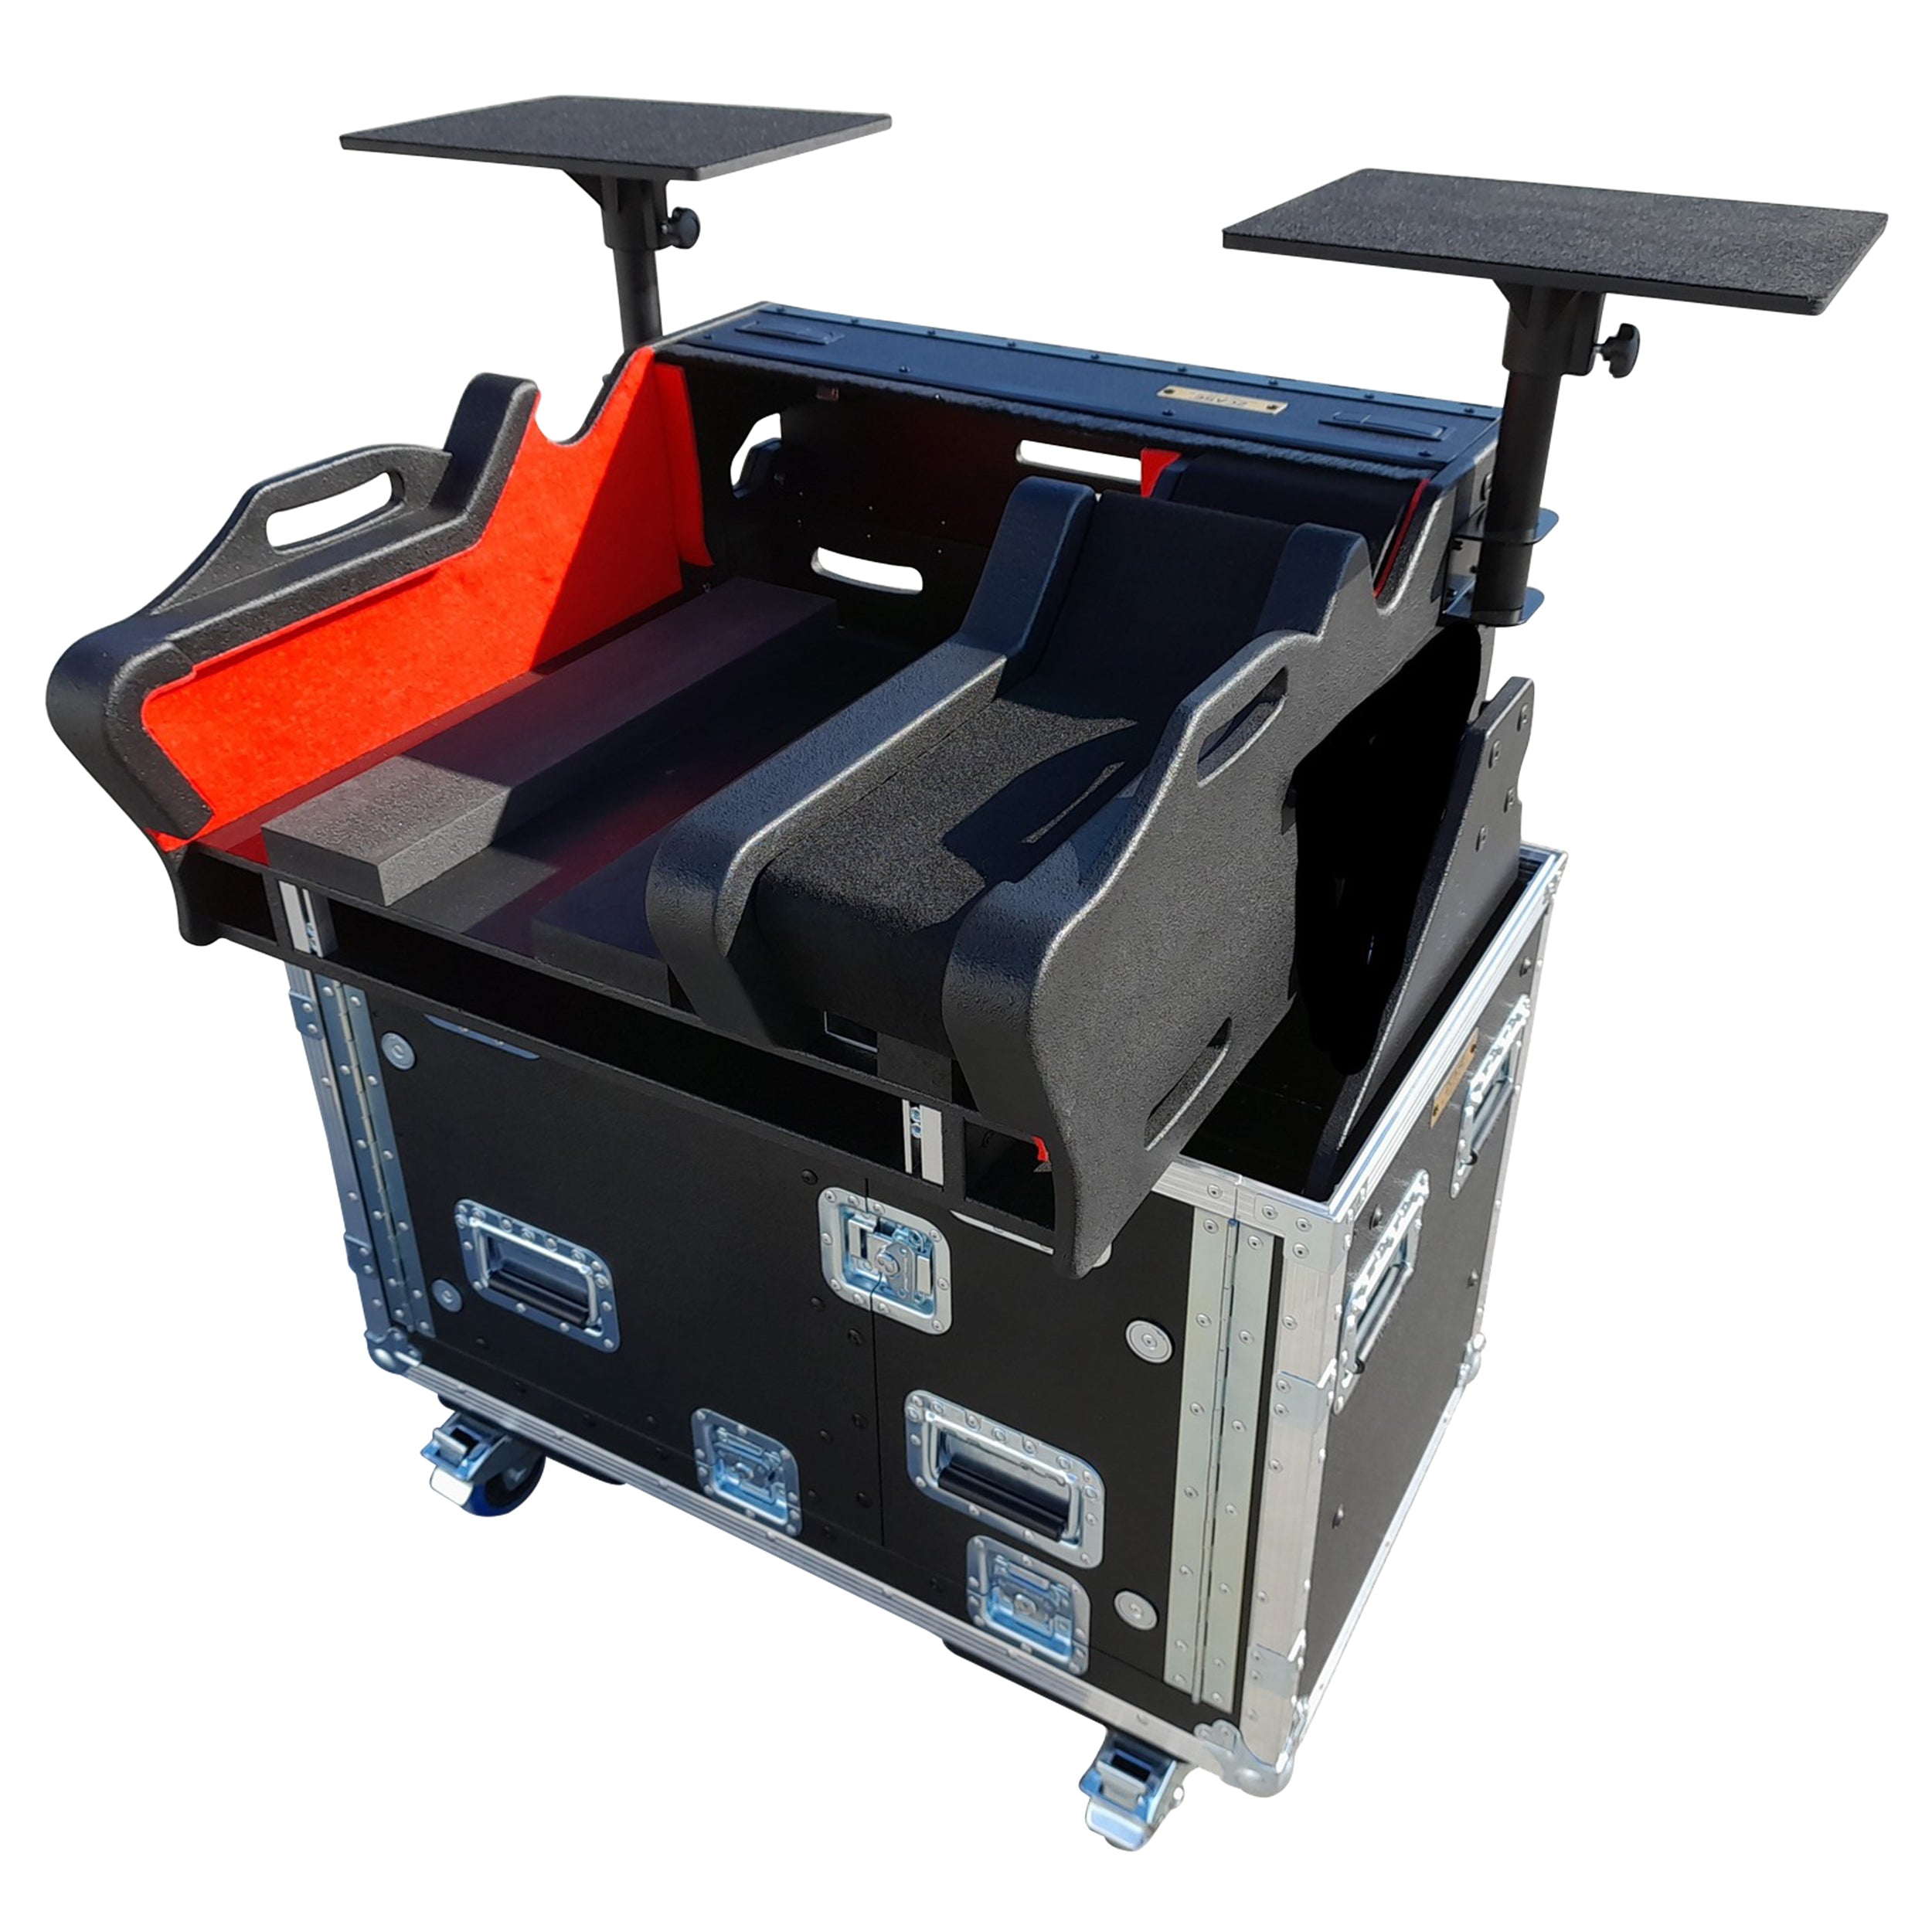 Pro X Flip-Ready Console Case for Yamaha DM7-EX Compact with Hydraulic Easy Lifting 1U Rack Space and Auto Casters XZF-YDM7EXCOMPACT1ULMA